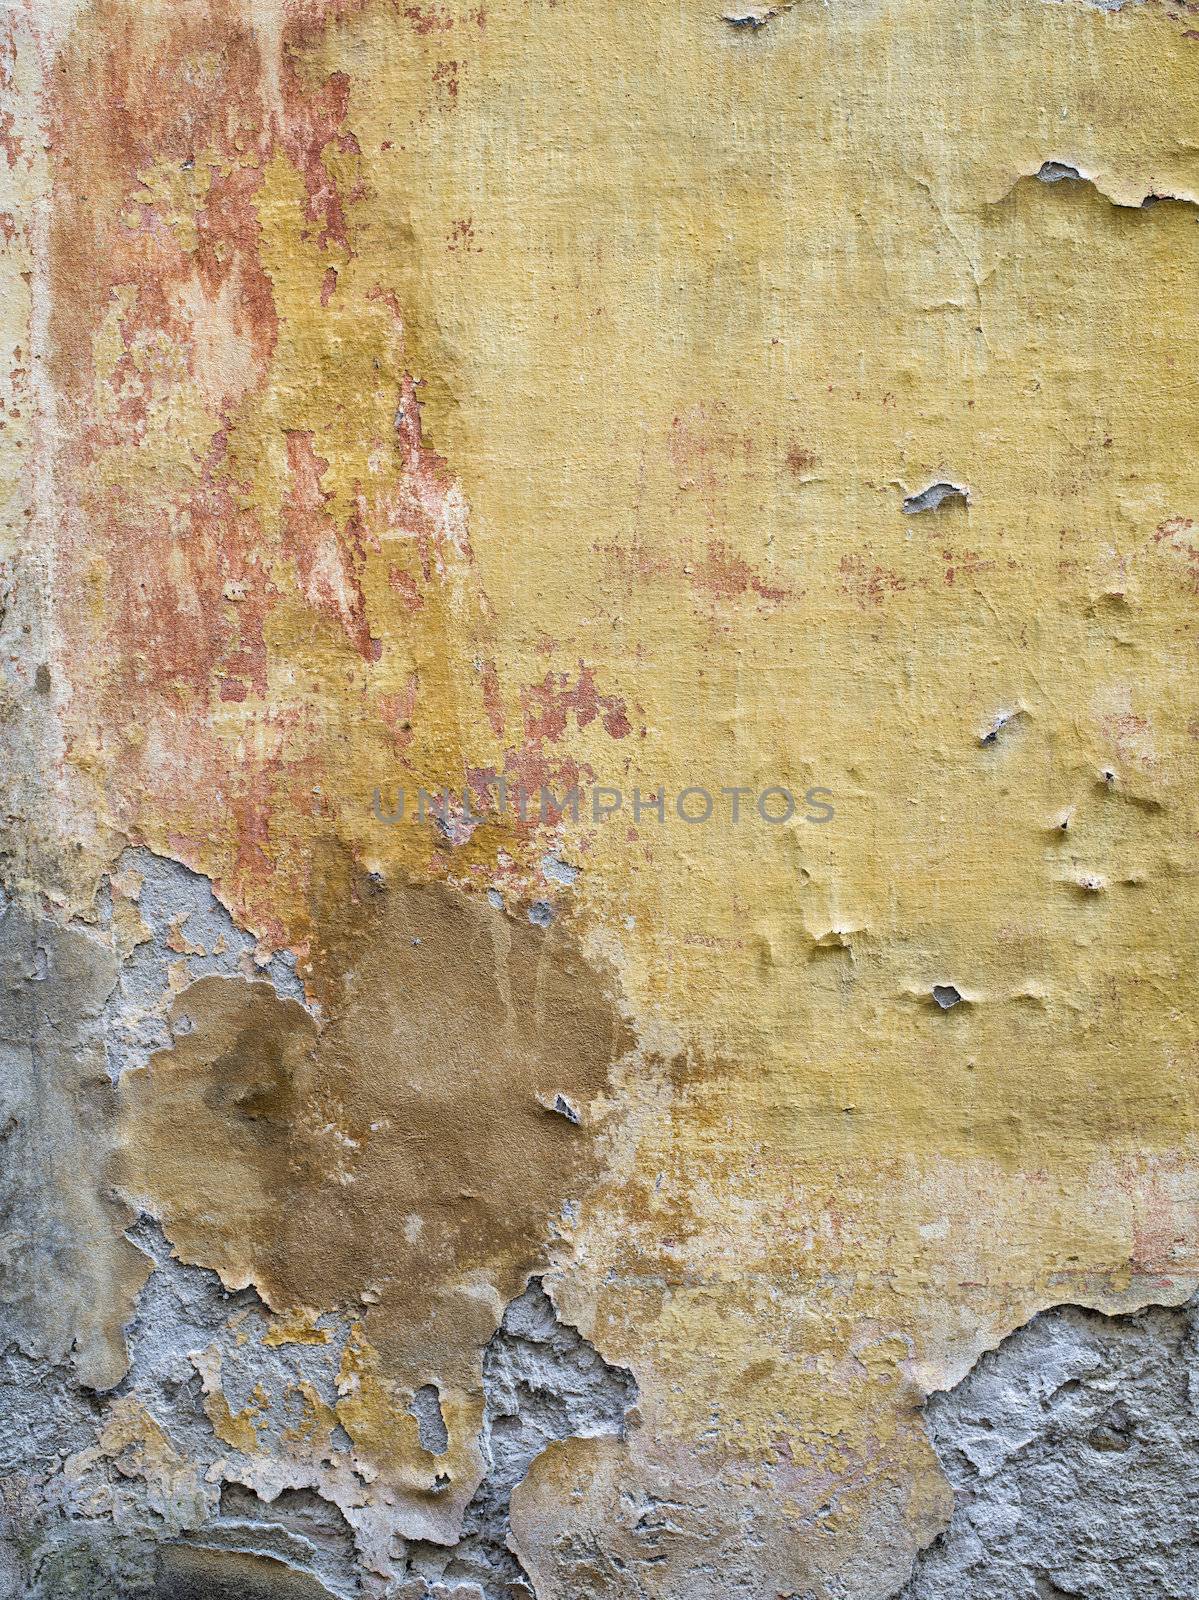 Vertical image of a wall with cracked paint in Tuscany, Italy